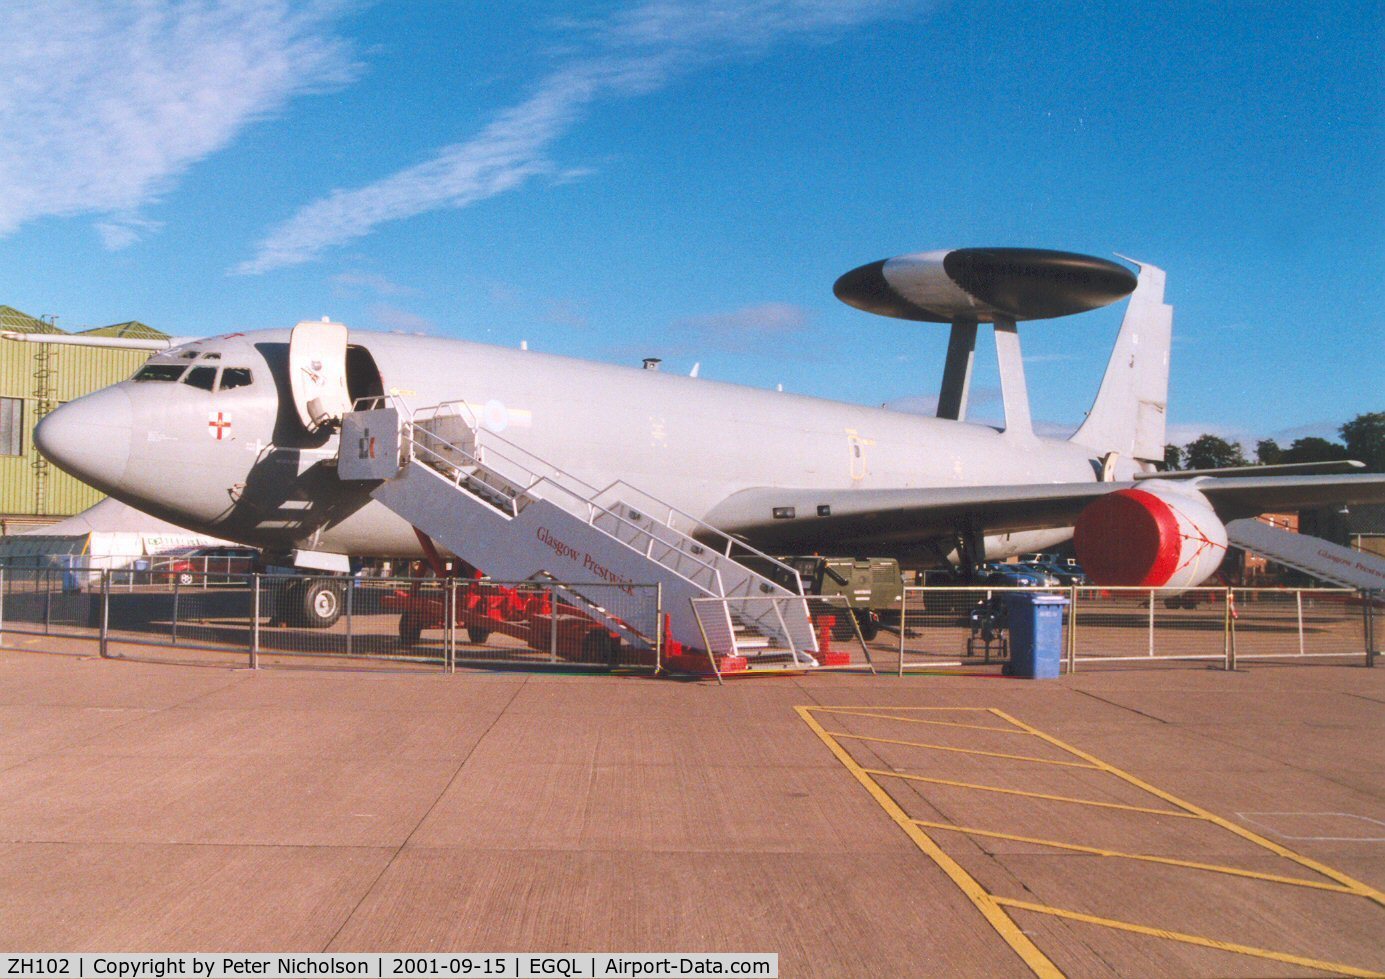 ZH102, 1990 Boeing E-3D Sentry AEW.1 C/N 24110, Sentry AEW.1, callsign Vulcan 23, of 8 Squadron on display at the 2001 Leuchars Airshow.